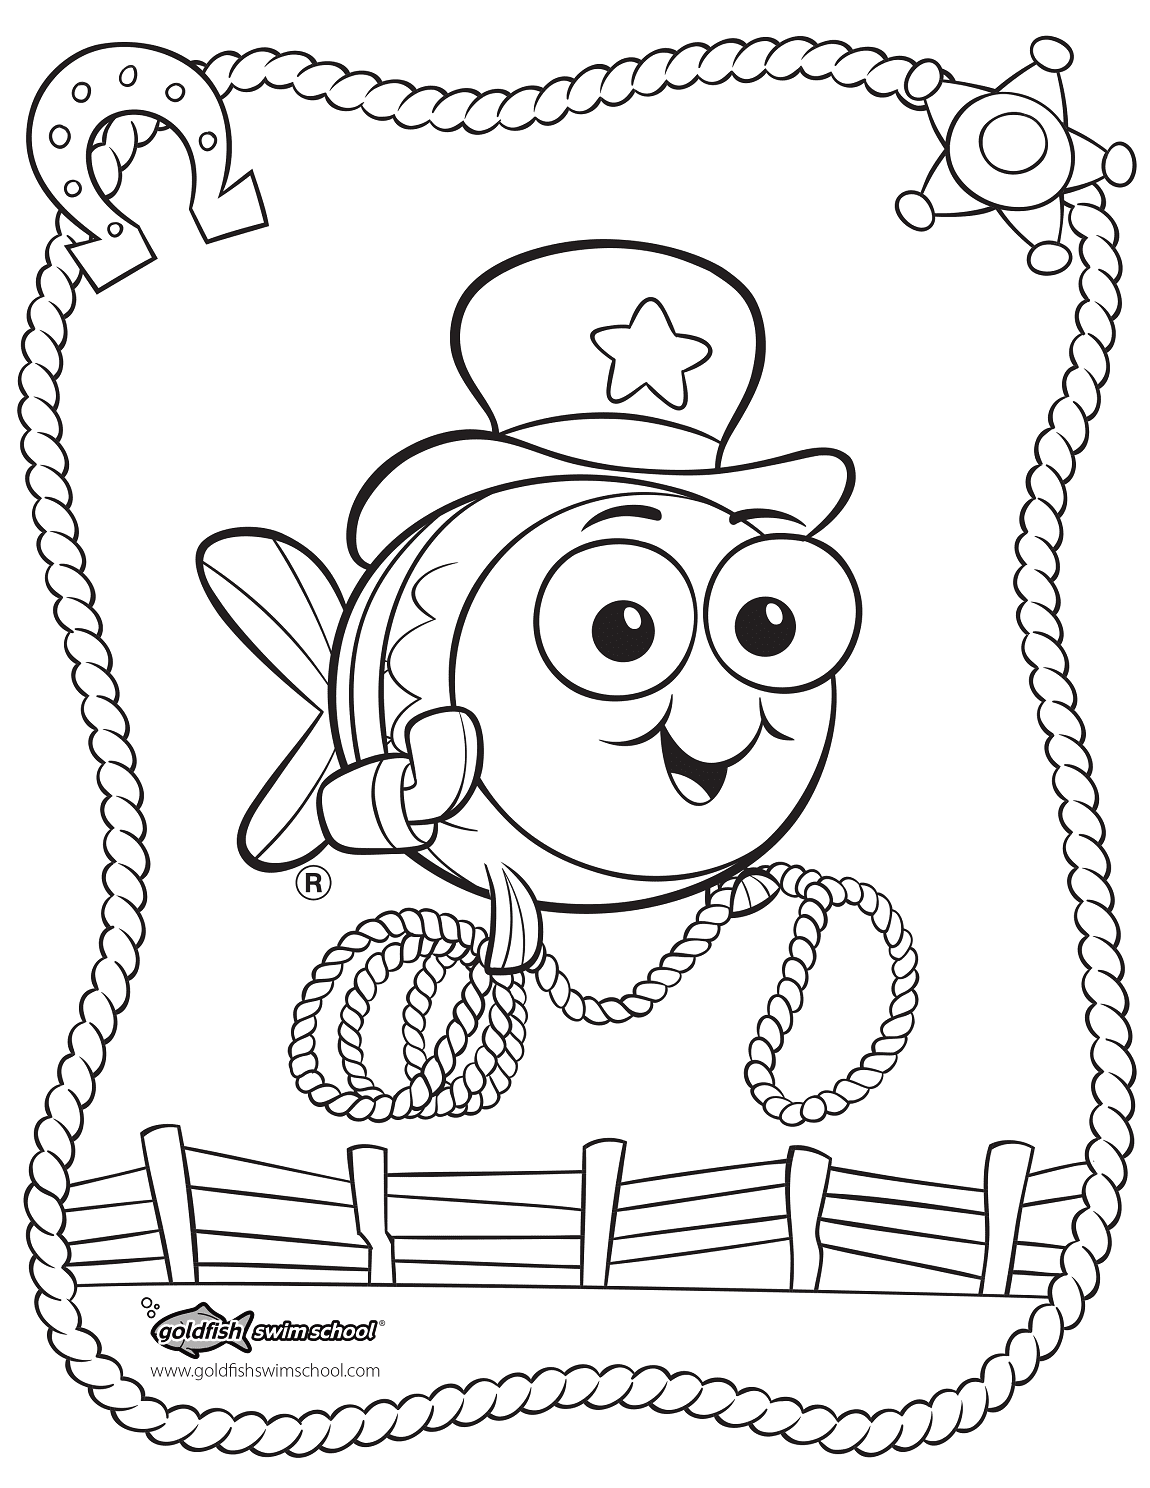 Cute Goldfish for Kids Coloring Pages